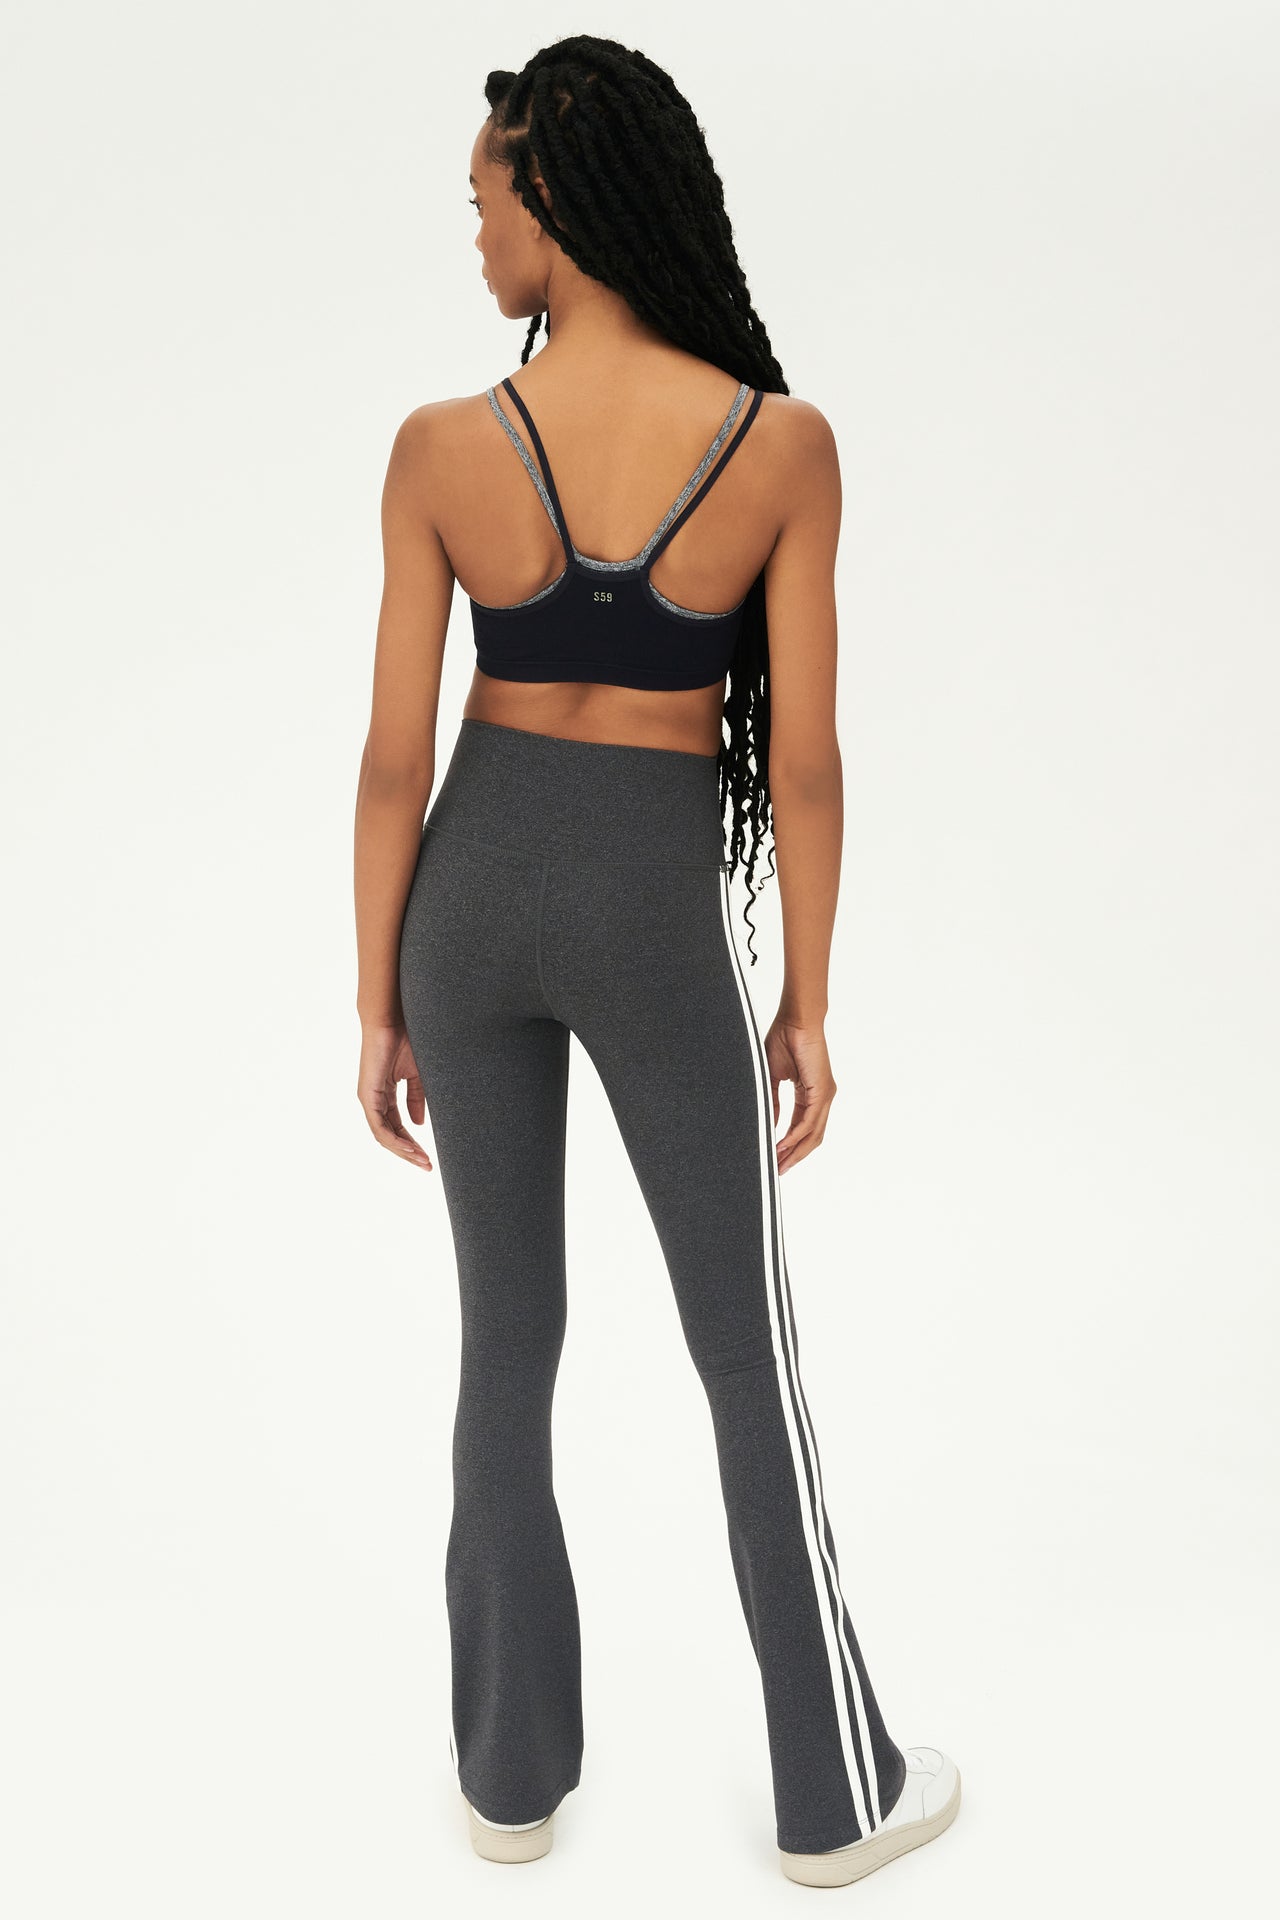 Full back view of woman with black braided hair wearing dark gray high waist below ankle length legging with wide flared bottoms and double white stripes on both legs. Also double dark gray and black racerback bra with spaghetti straps. Paired with white shoes.